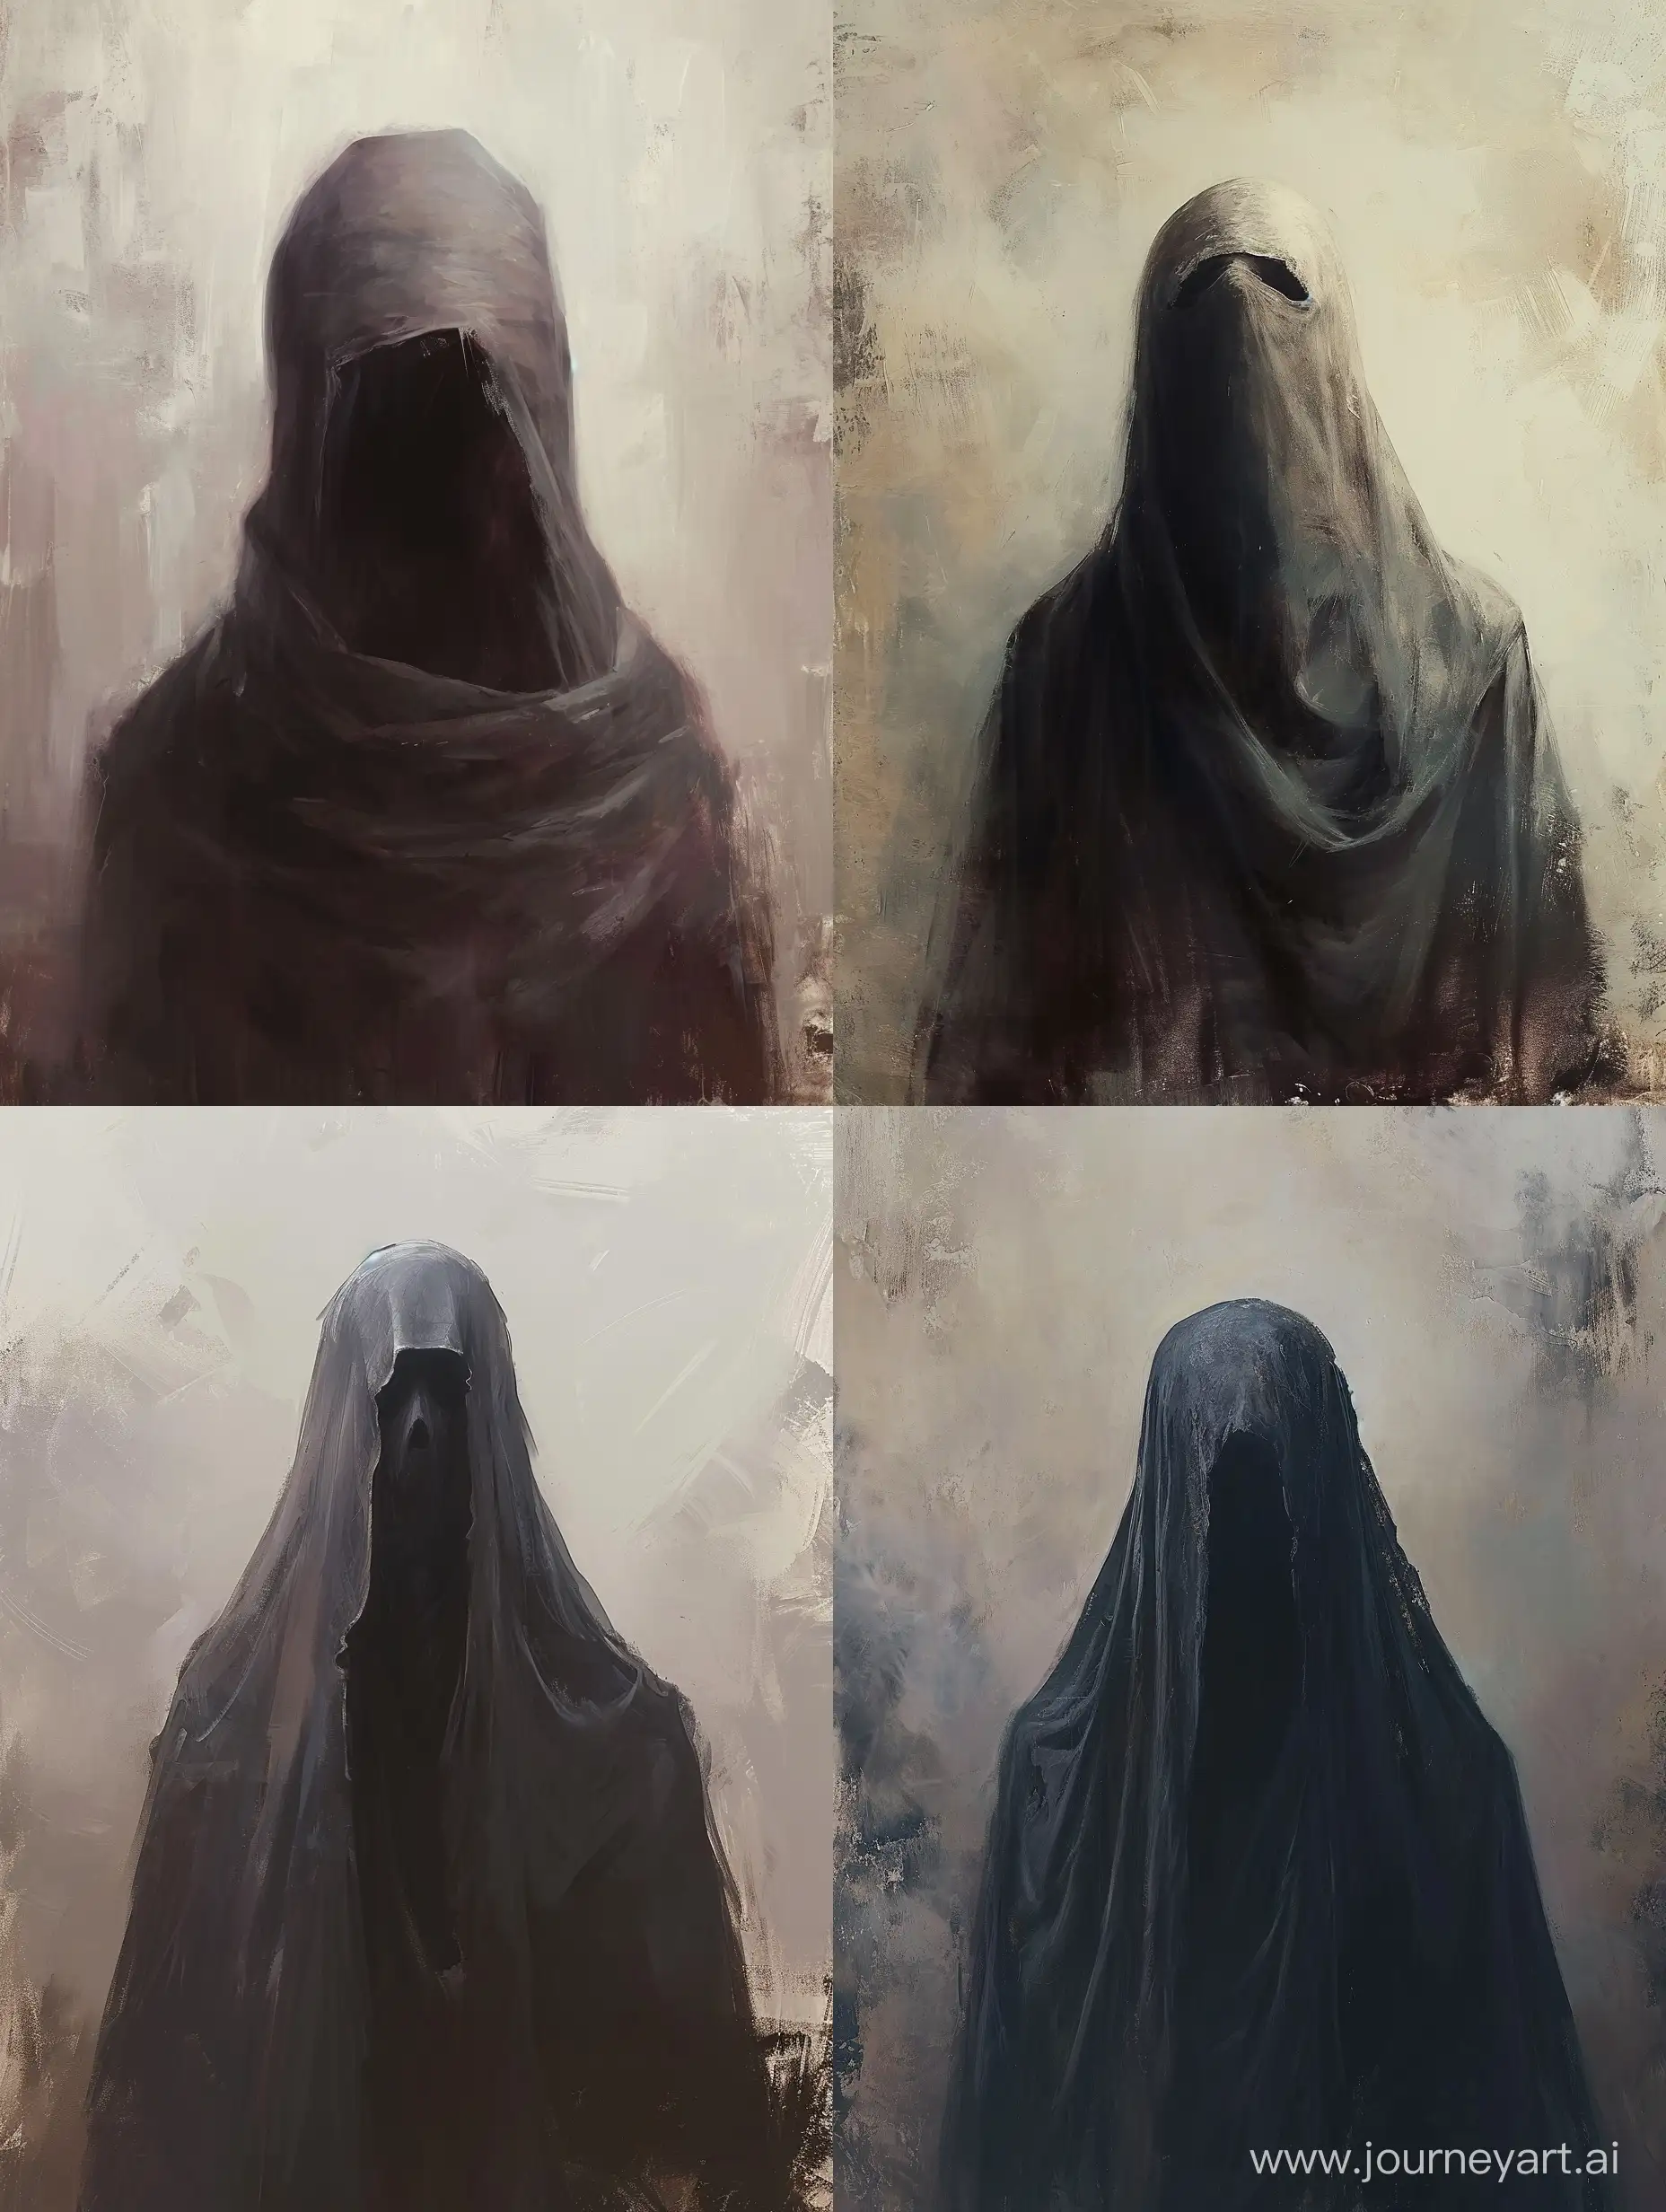 /imagine prompt: A haunting portrait of a ghost, covered with a dark cloak that leaves its mouth uncovered, looking straight ahead in a realistic style, captured in 4K resolution. The atmosphere is eerie and supernatural, with the ghostly figure captured in a close-up, showing intricate details in the cloak and the ghost's face. The colors are pale and ethereal, with a high contrast that adds to the ghostly atmosphere of the painting. The background is blurred, with a soft focus that emphasizes the focus on the ghost and its supernatural appearance. The composition is simple, with the focus on the ghost's ghostly and otherworldly quality. The painting has a realistic quality that allows for every detail to be seen clearly, making it feel like a real portrayal of a ghost. The brushstrokes are intricate, emphasizing the ghostly and otherworldly quality of the figure. The ghost is shown in a frontal view, with its face partially covered by the cloak and its mouth exposed, giving it a haunting and eerie appearance. It's a perfect fit for those who appreciate the eerie and supernatural quality of realistic paintings. --ar 3:4